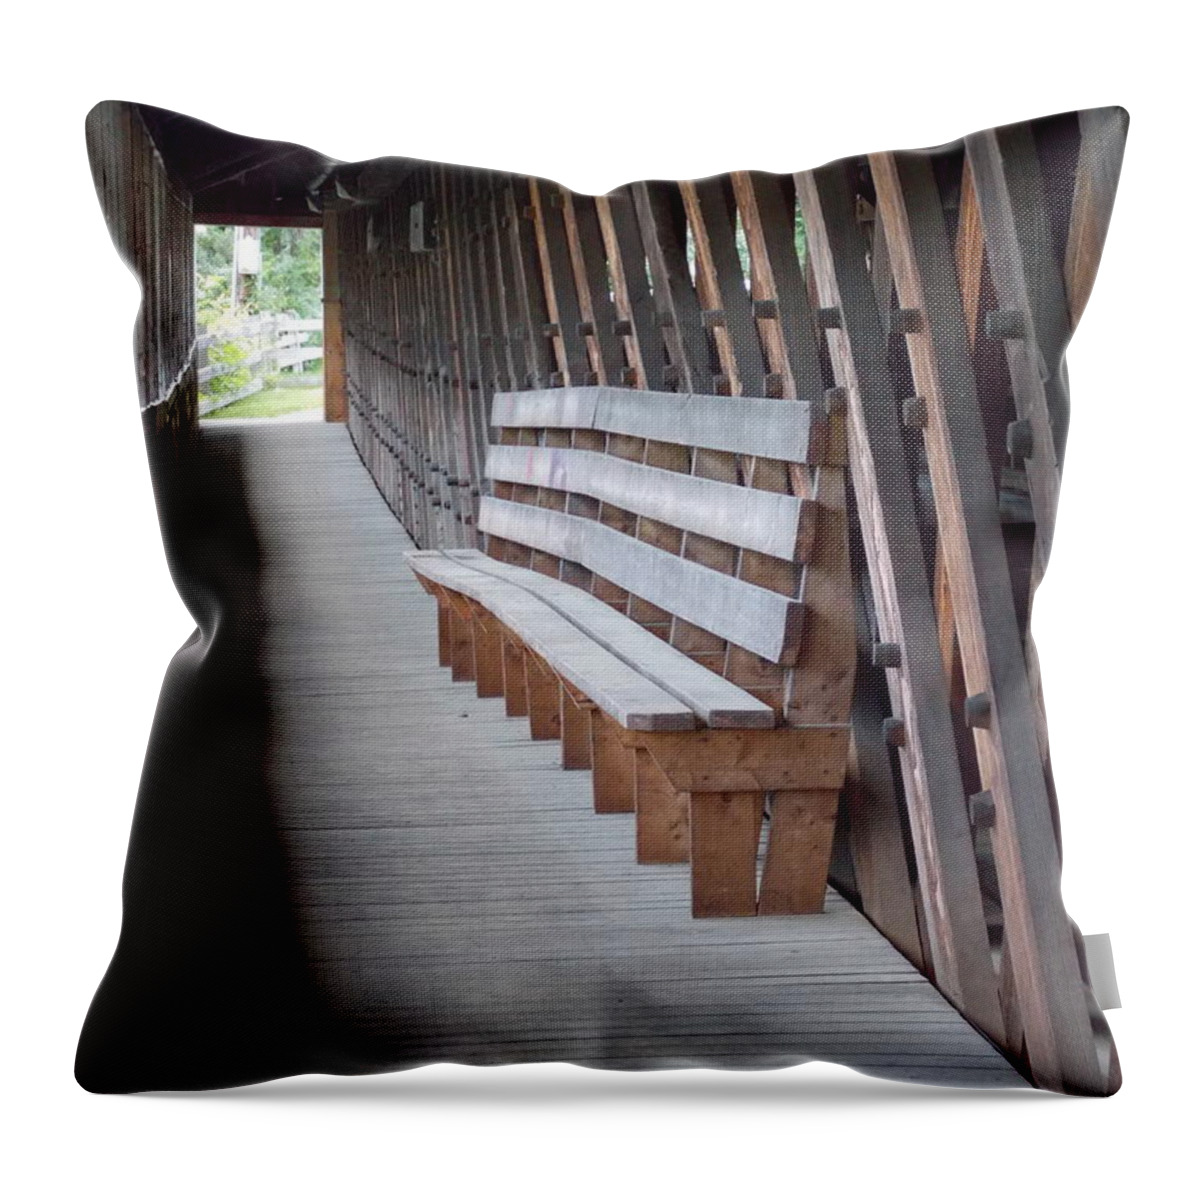 Covered Bridges Throw Pillow featuring the photograph Bench Inside a Covered Bridge by Catherine Gagne